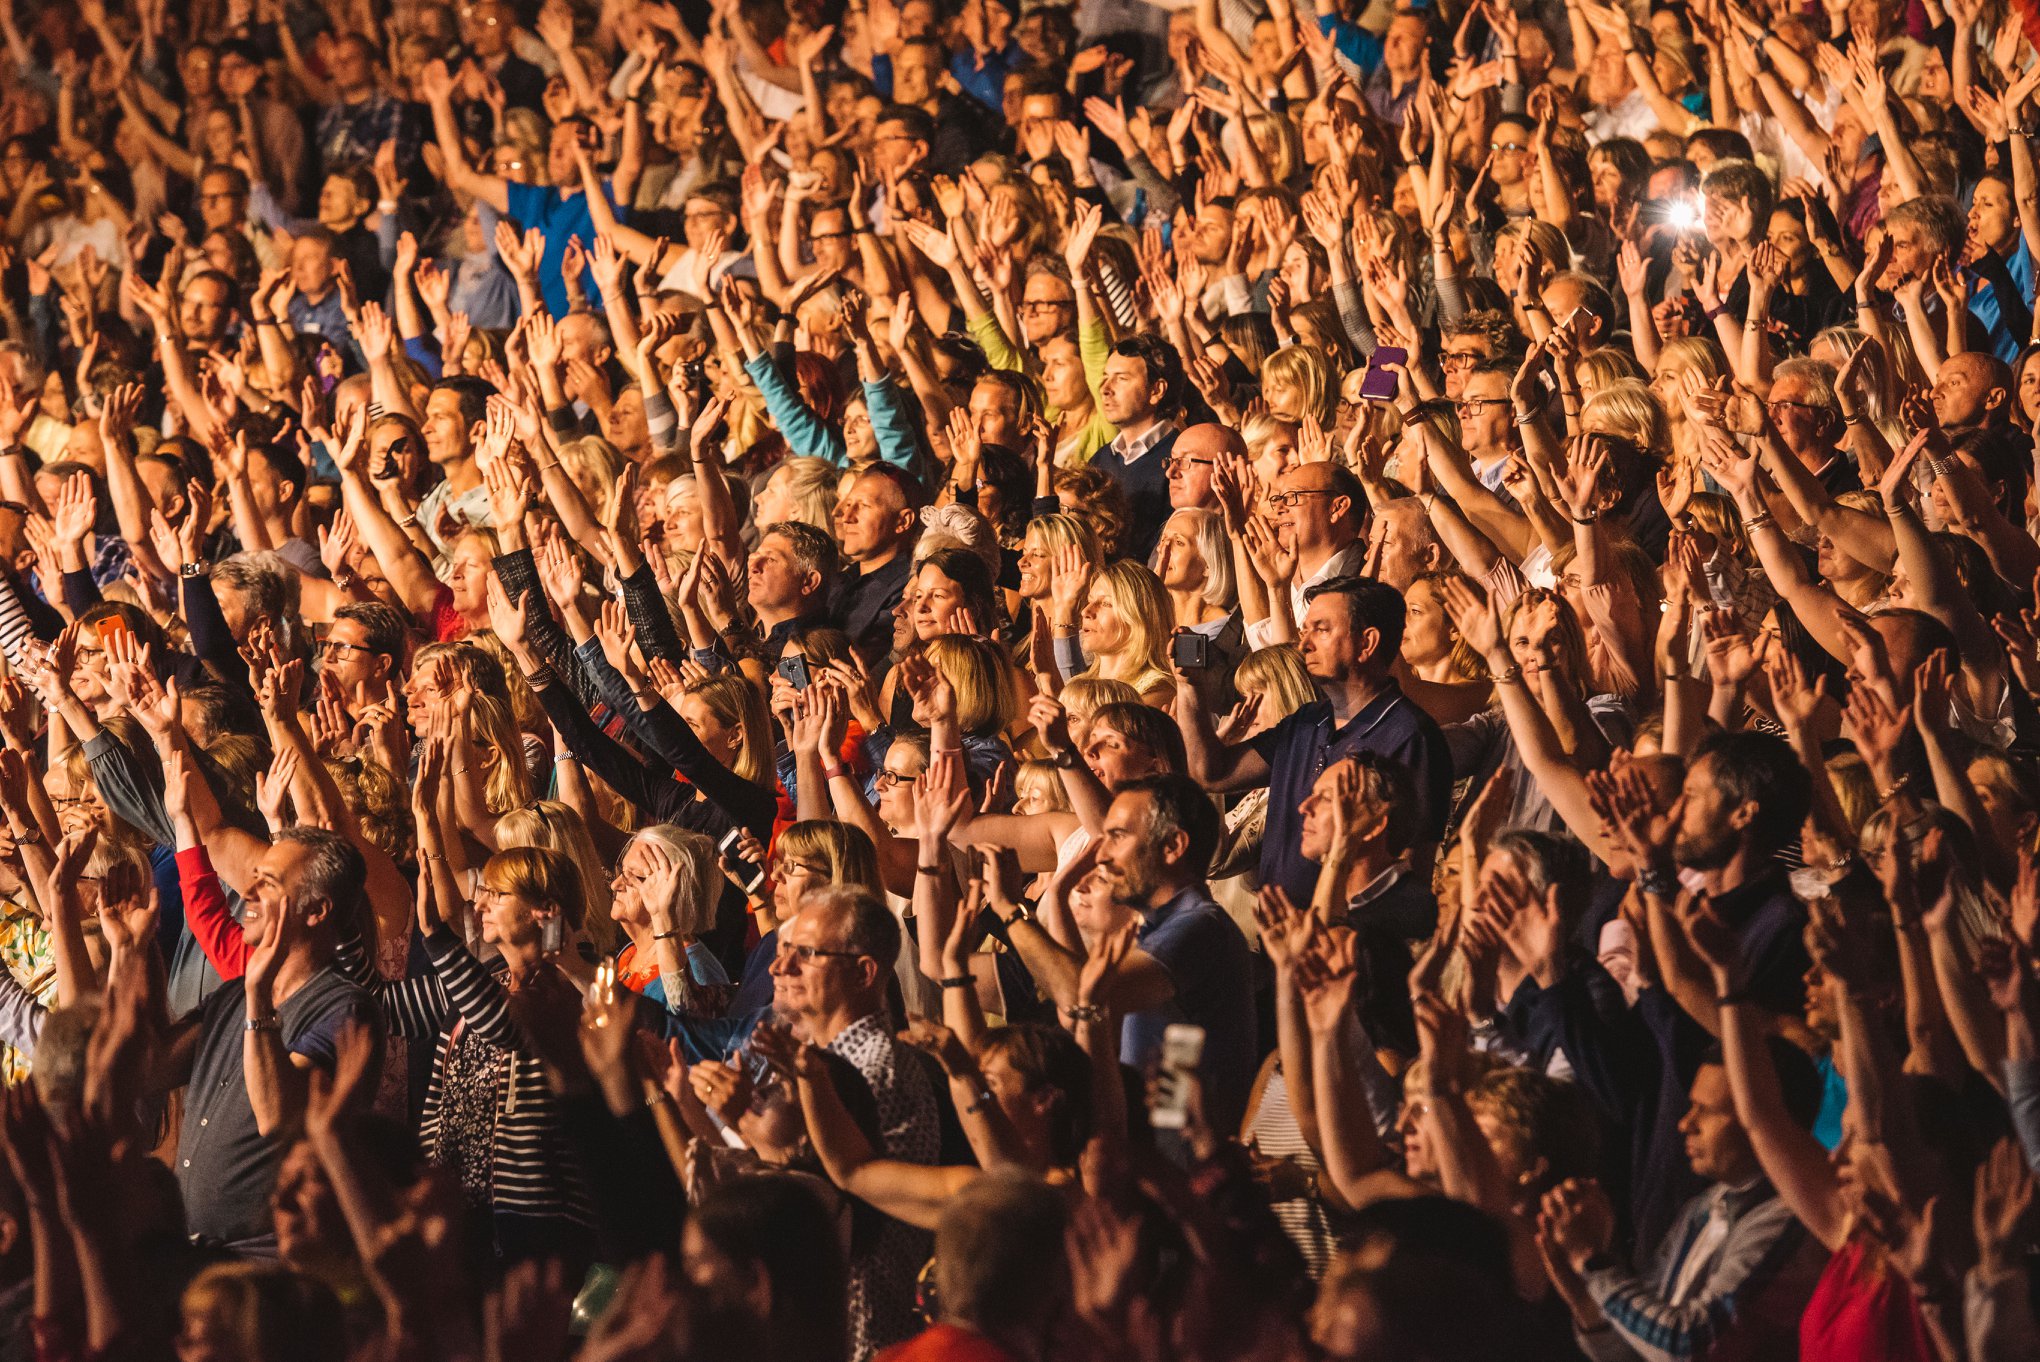 Hands up if you're excited for this year's festival! The line-up is hotting up…